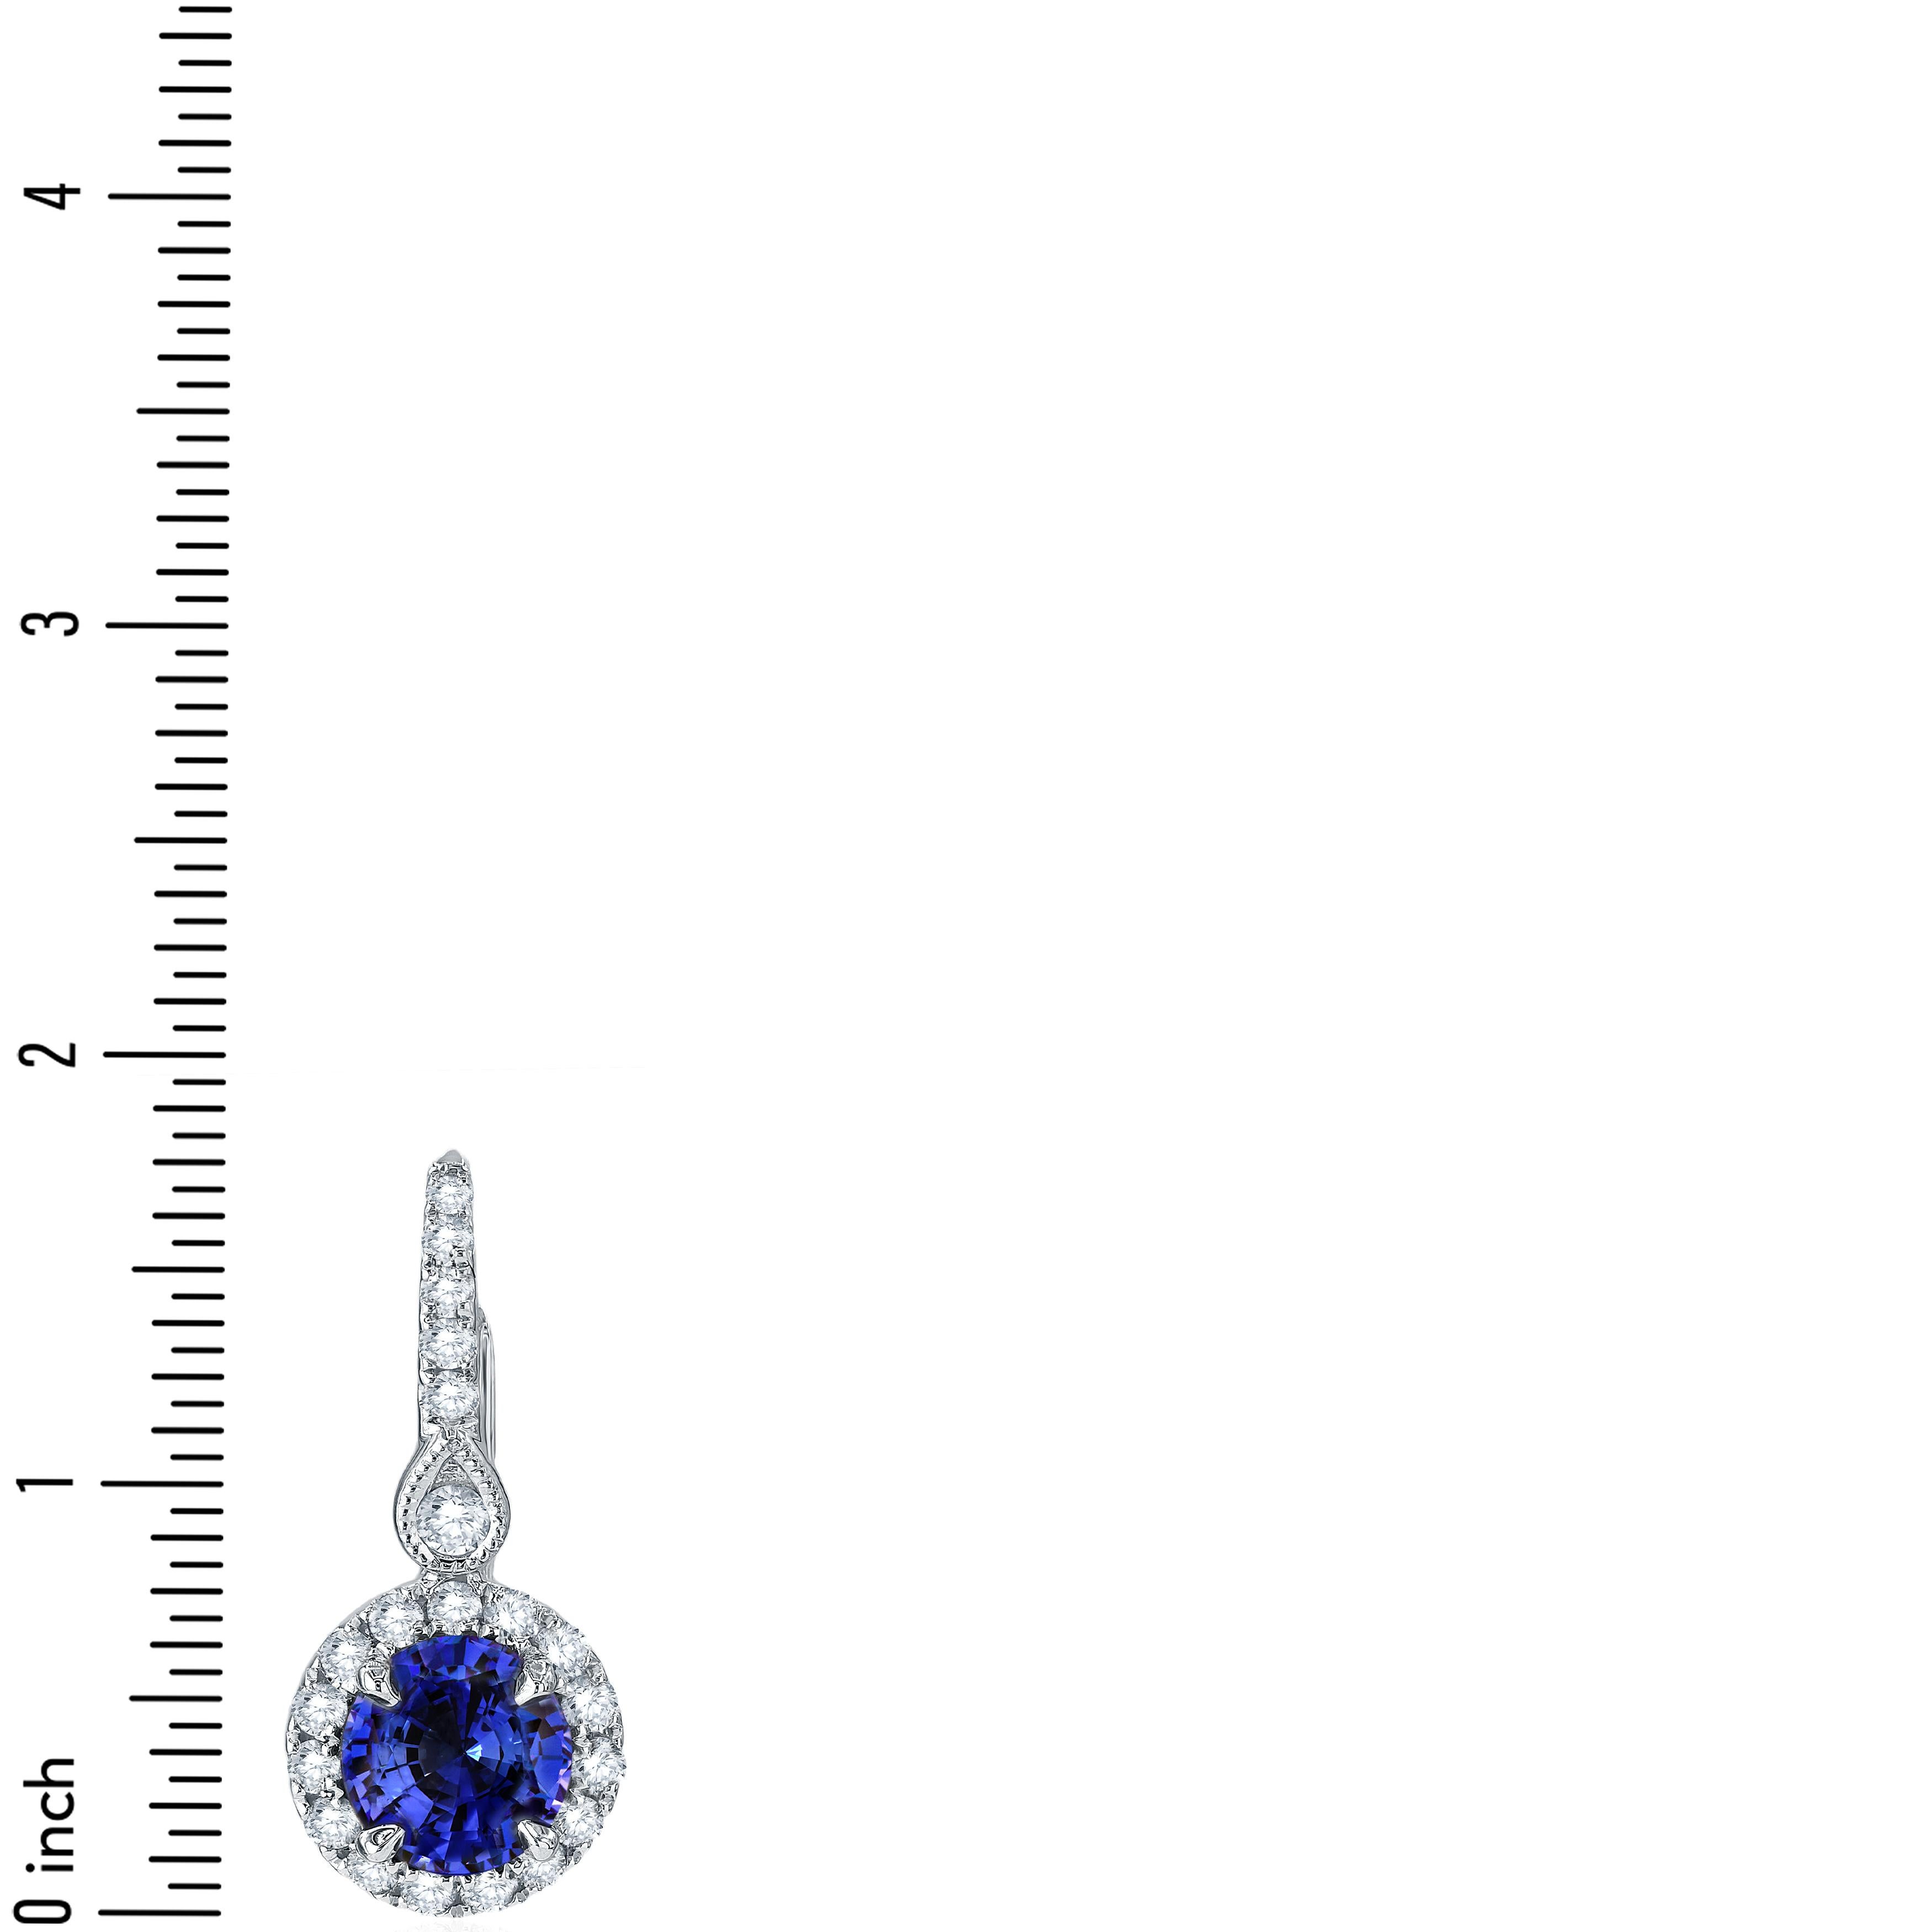 These stunning Halo Drop Sapphire earrings, showcasing a round sapphire weighing 1.57 carats, elegantly accompanied by 0.50 carats of round, natural diamonds. Delicate milgrain work above the body of the earring leads to a decorated hoop. The raised